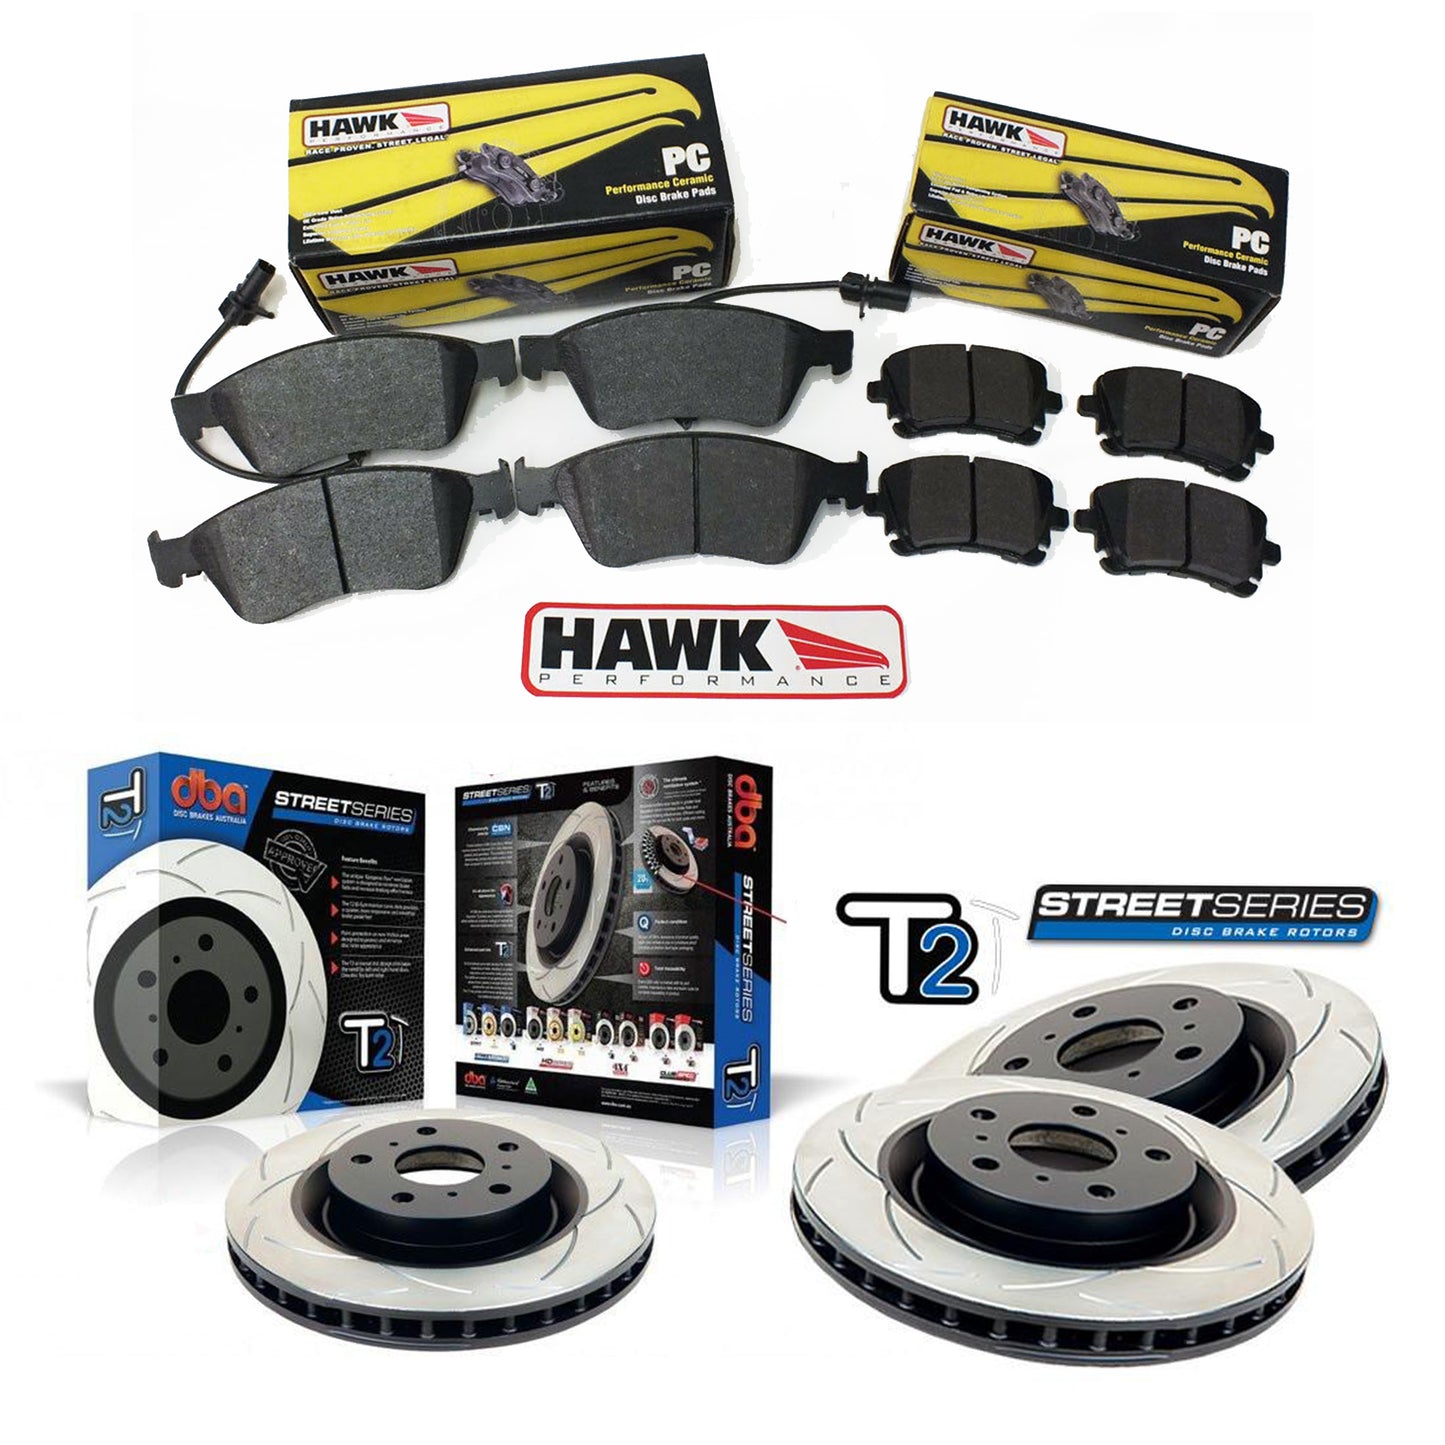 DBA + Hawk Performance - Front & Rear Brake Package - DBA T2 Slotted Rotors + Hawk Performance Ceramic Pads - Forester SG (02-07)